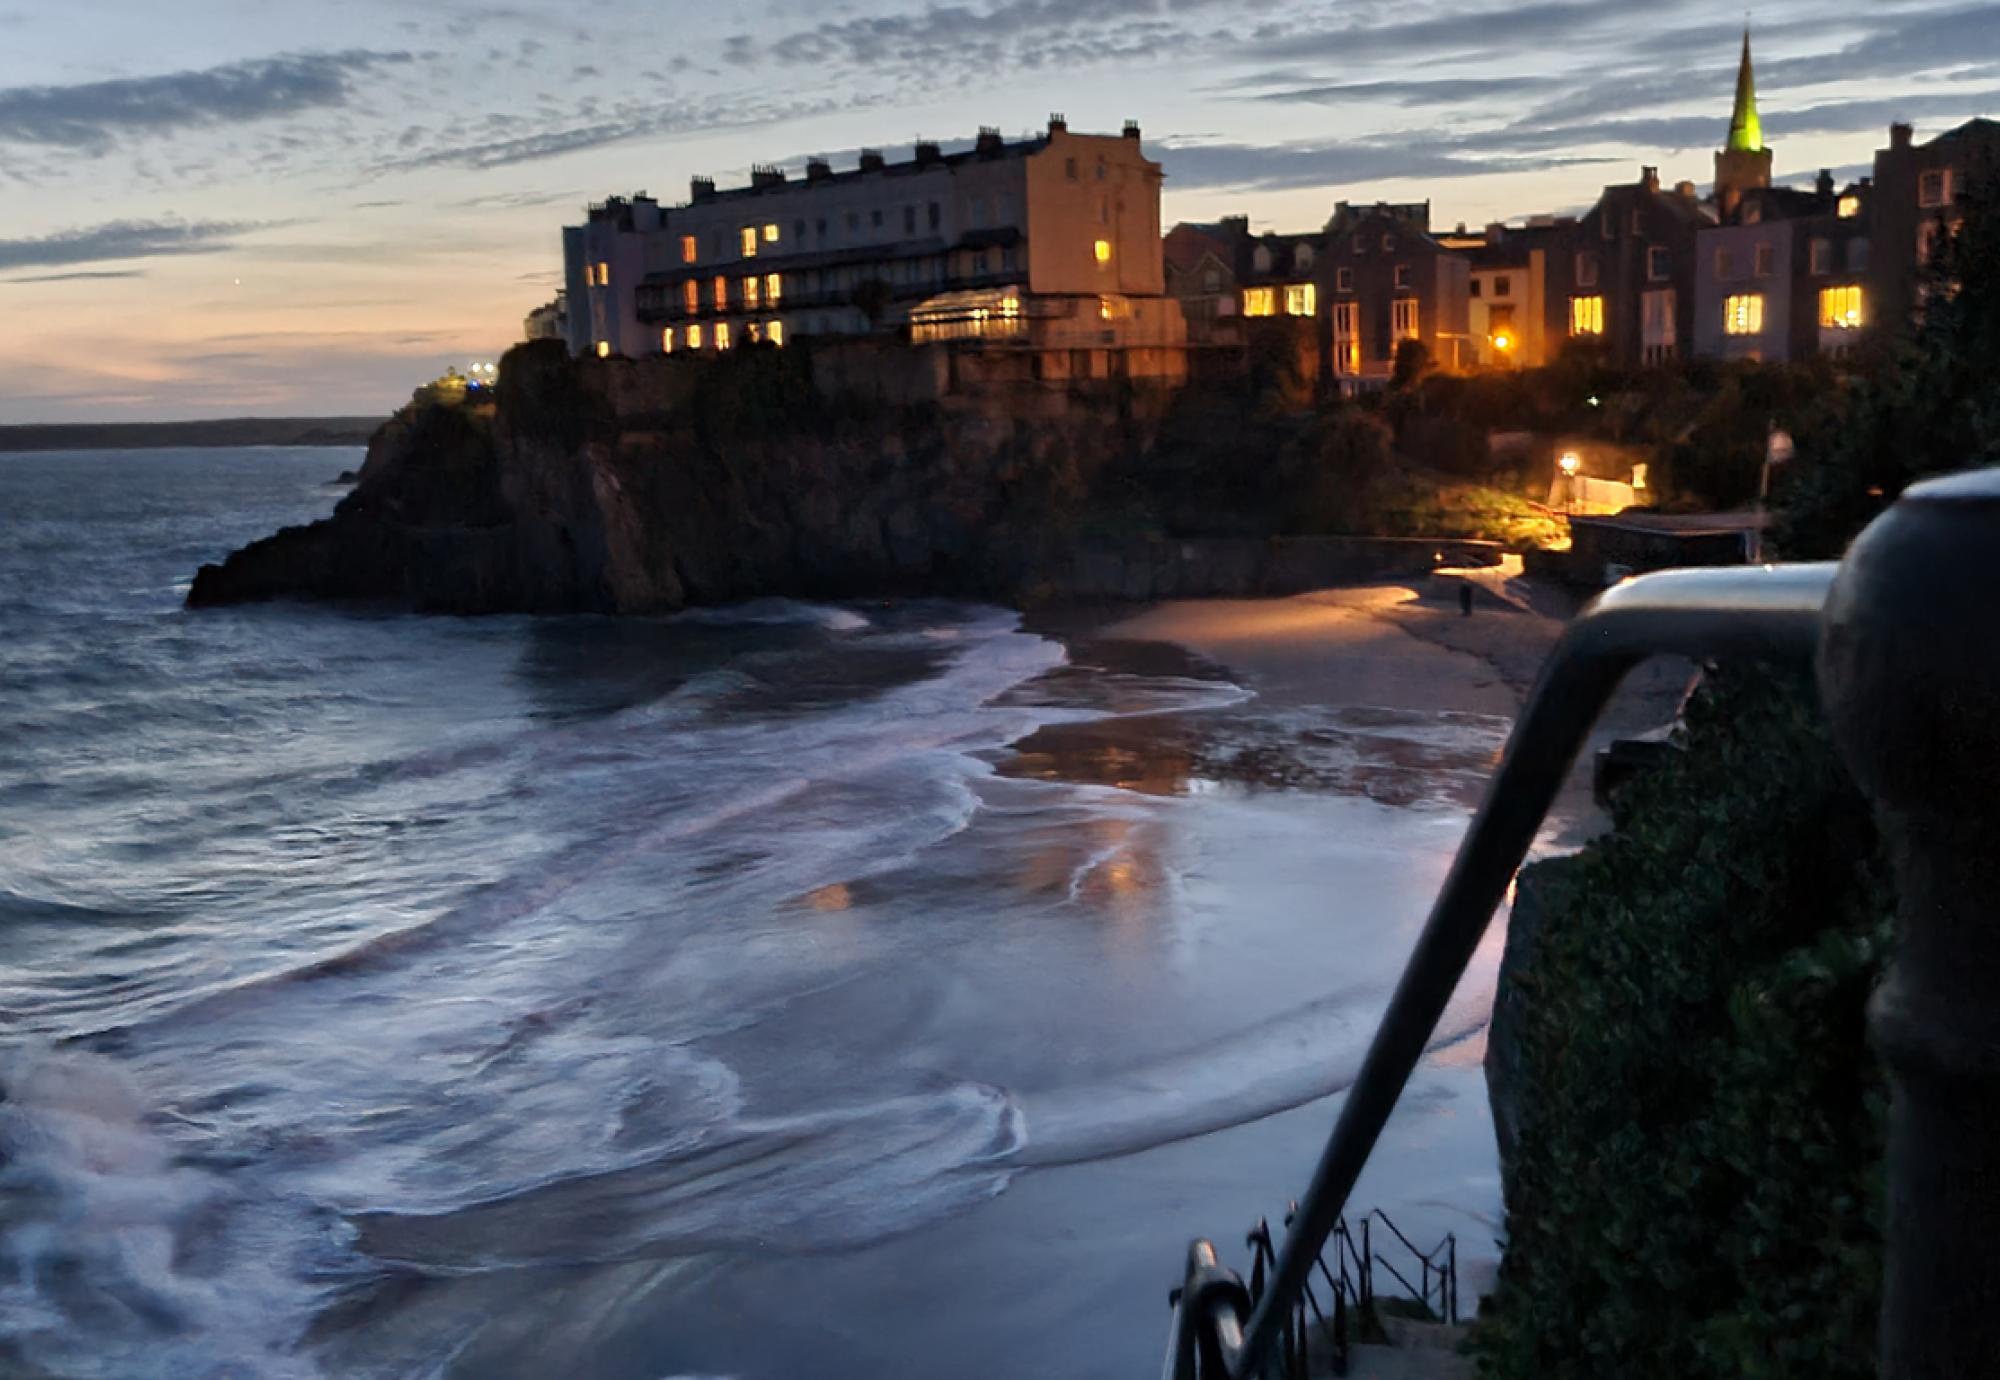 Sunset view of houses at the top of cliffs in Tenby